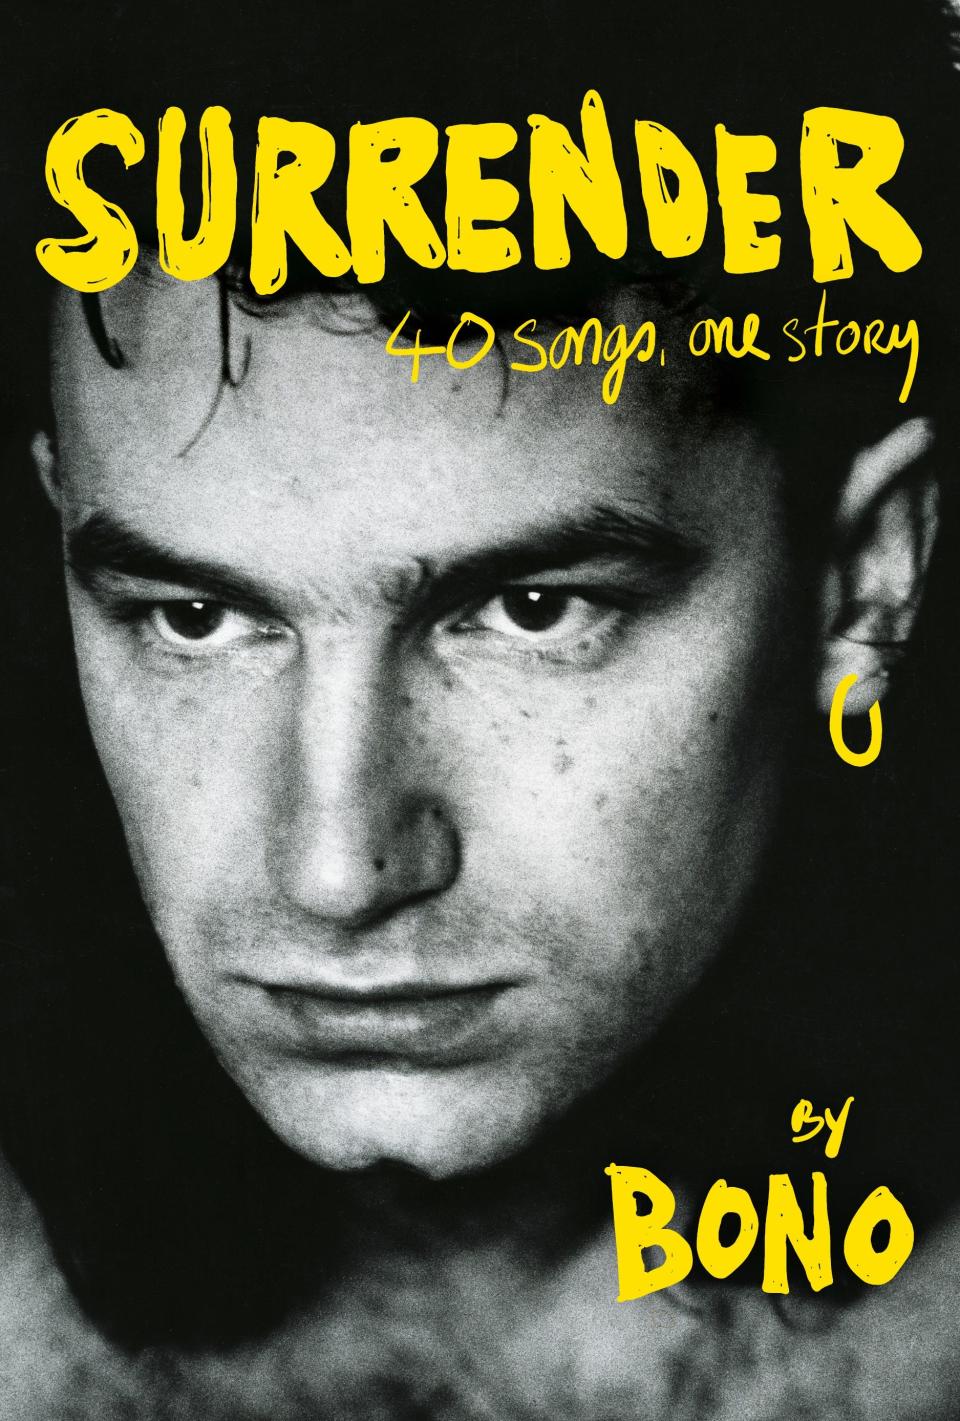 Bono's memoir, "Surrender: 40 Songs, One Story," contains 40 chapters, each named after a U2 song.